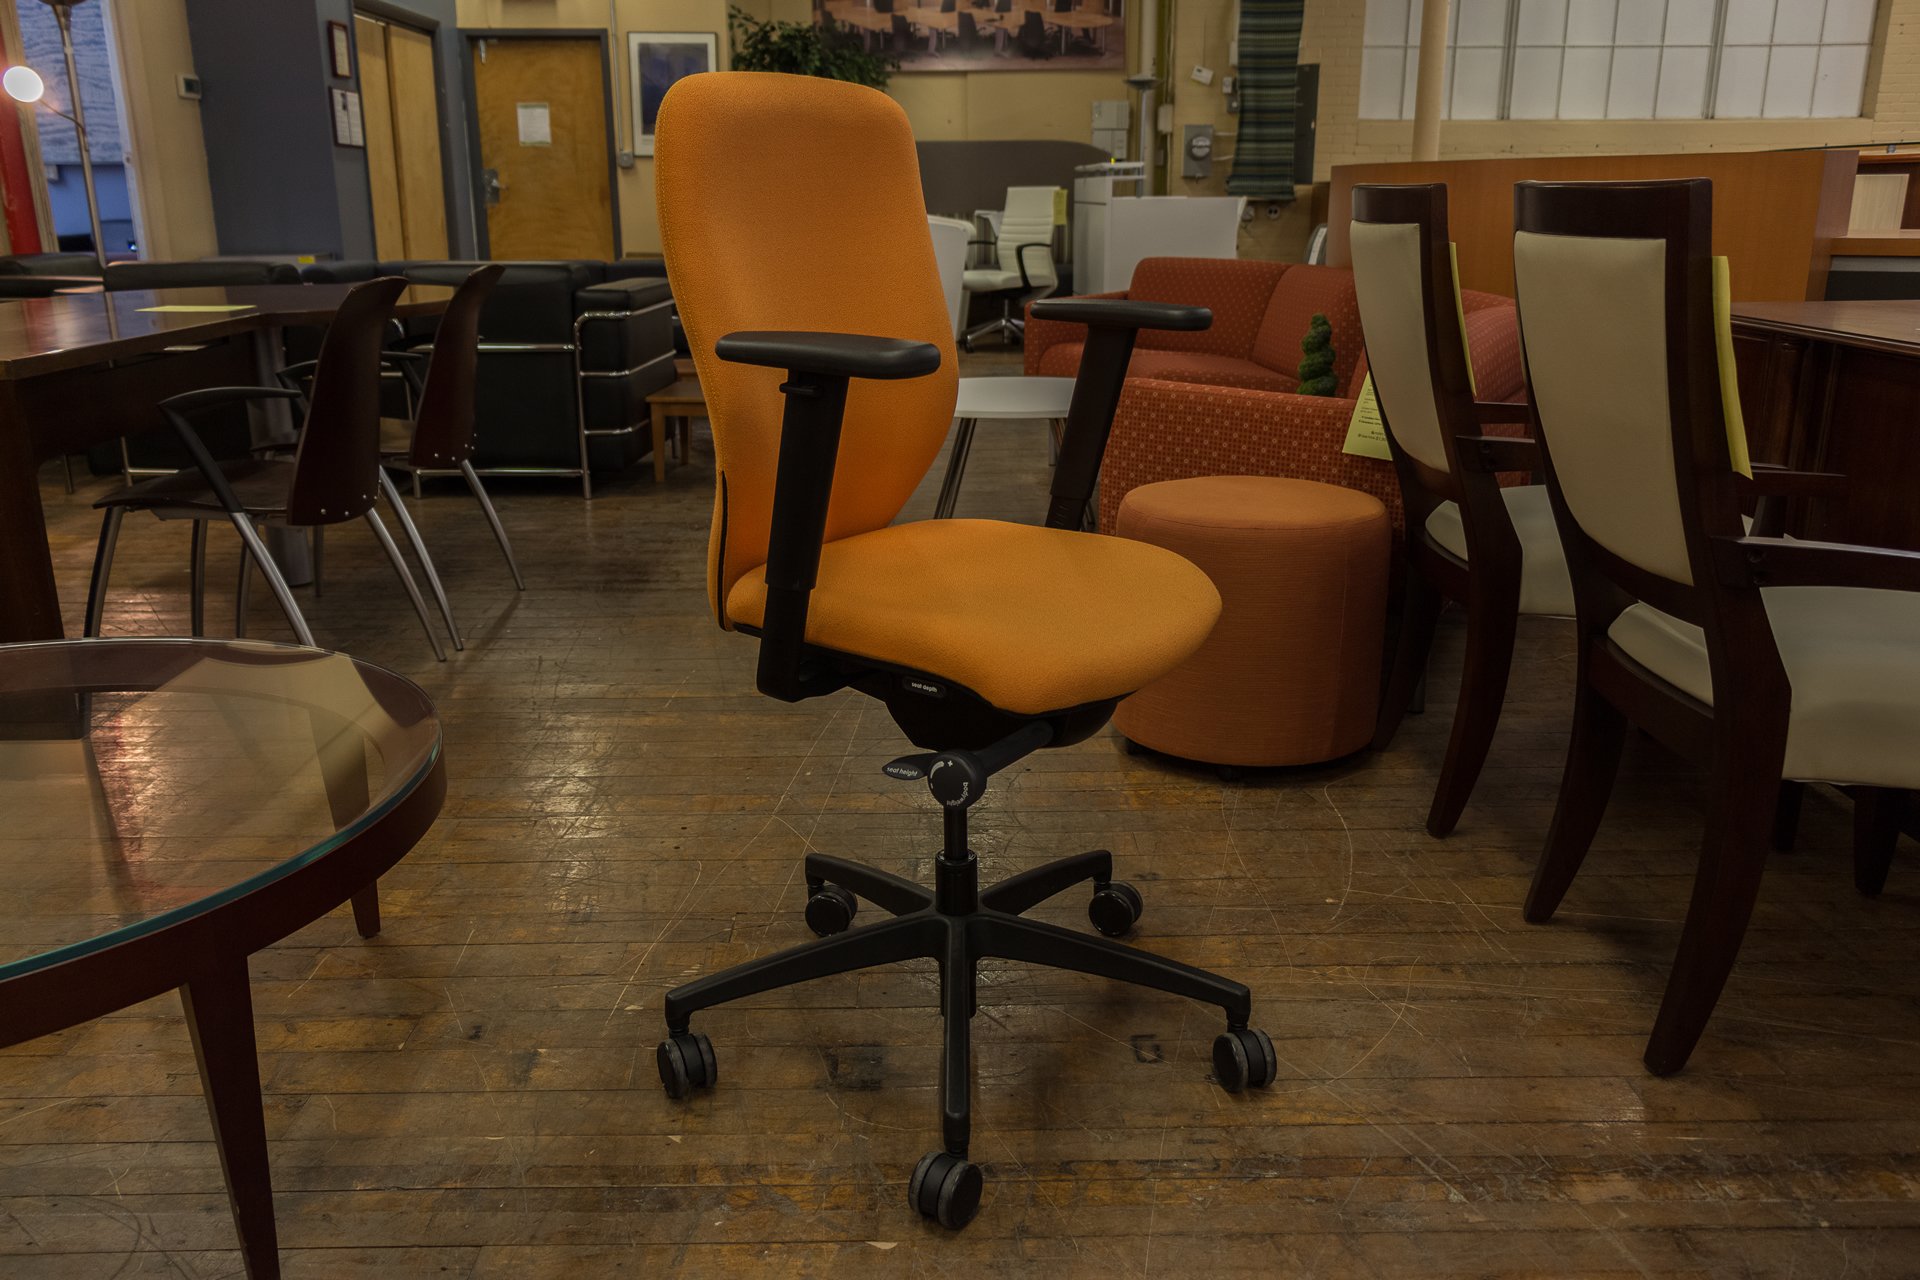 peartreeofficefurniture_peartreeofficefurniture_peartreeofficefurniture_boss-design-multi-function-task-chairs-in-red-blue-and-orange-4.jpg